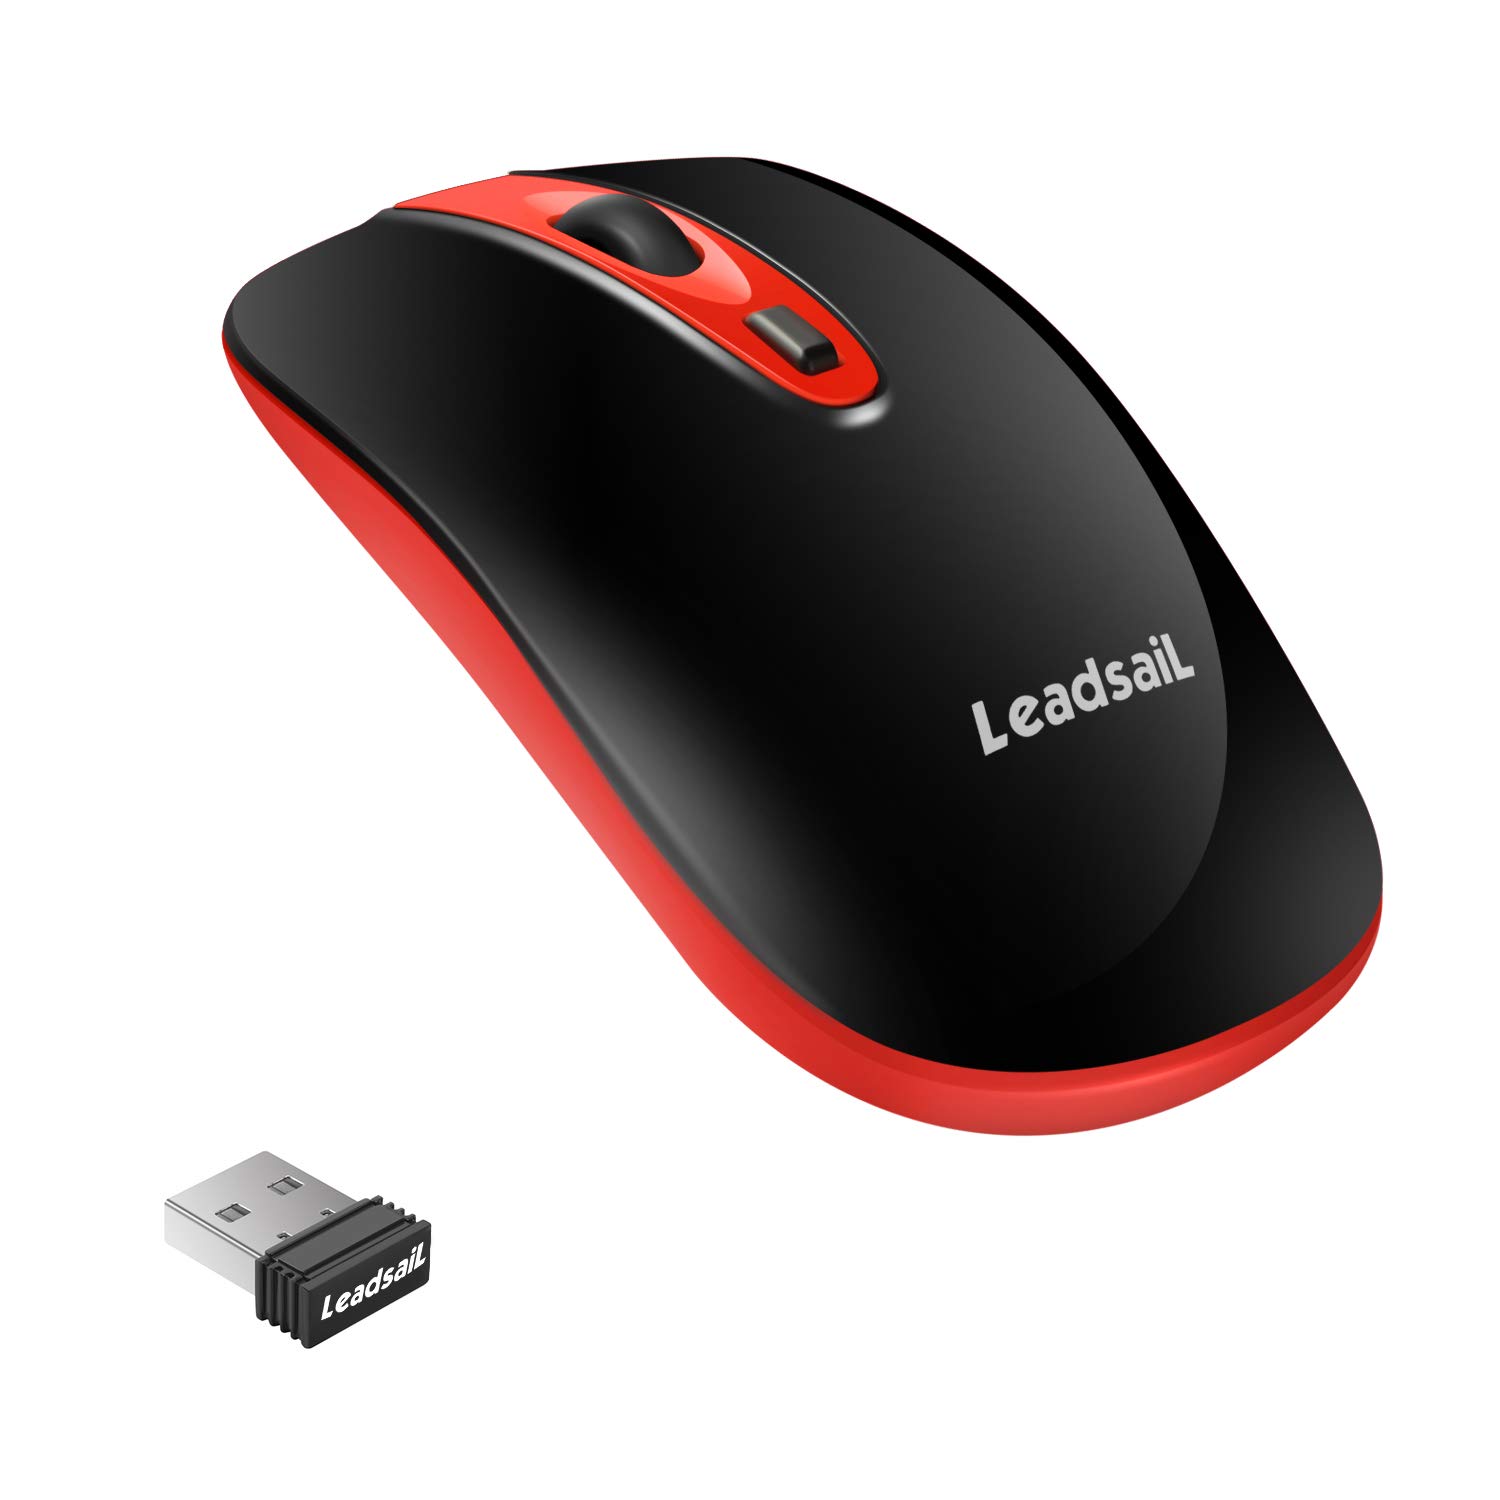 LeadsaiL Wireless computer Mouse, 24g Portable Slim USB Mouse, Silent click Laptop Mouse with One AA Battery 3 Adjustable Levels